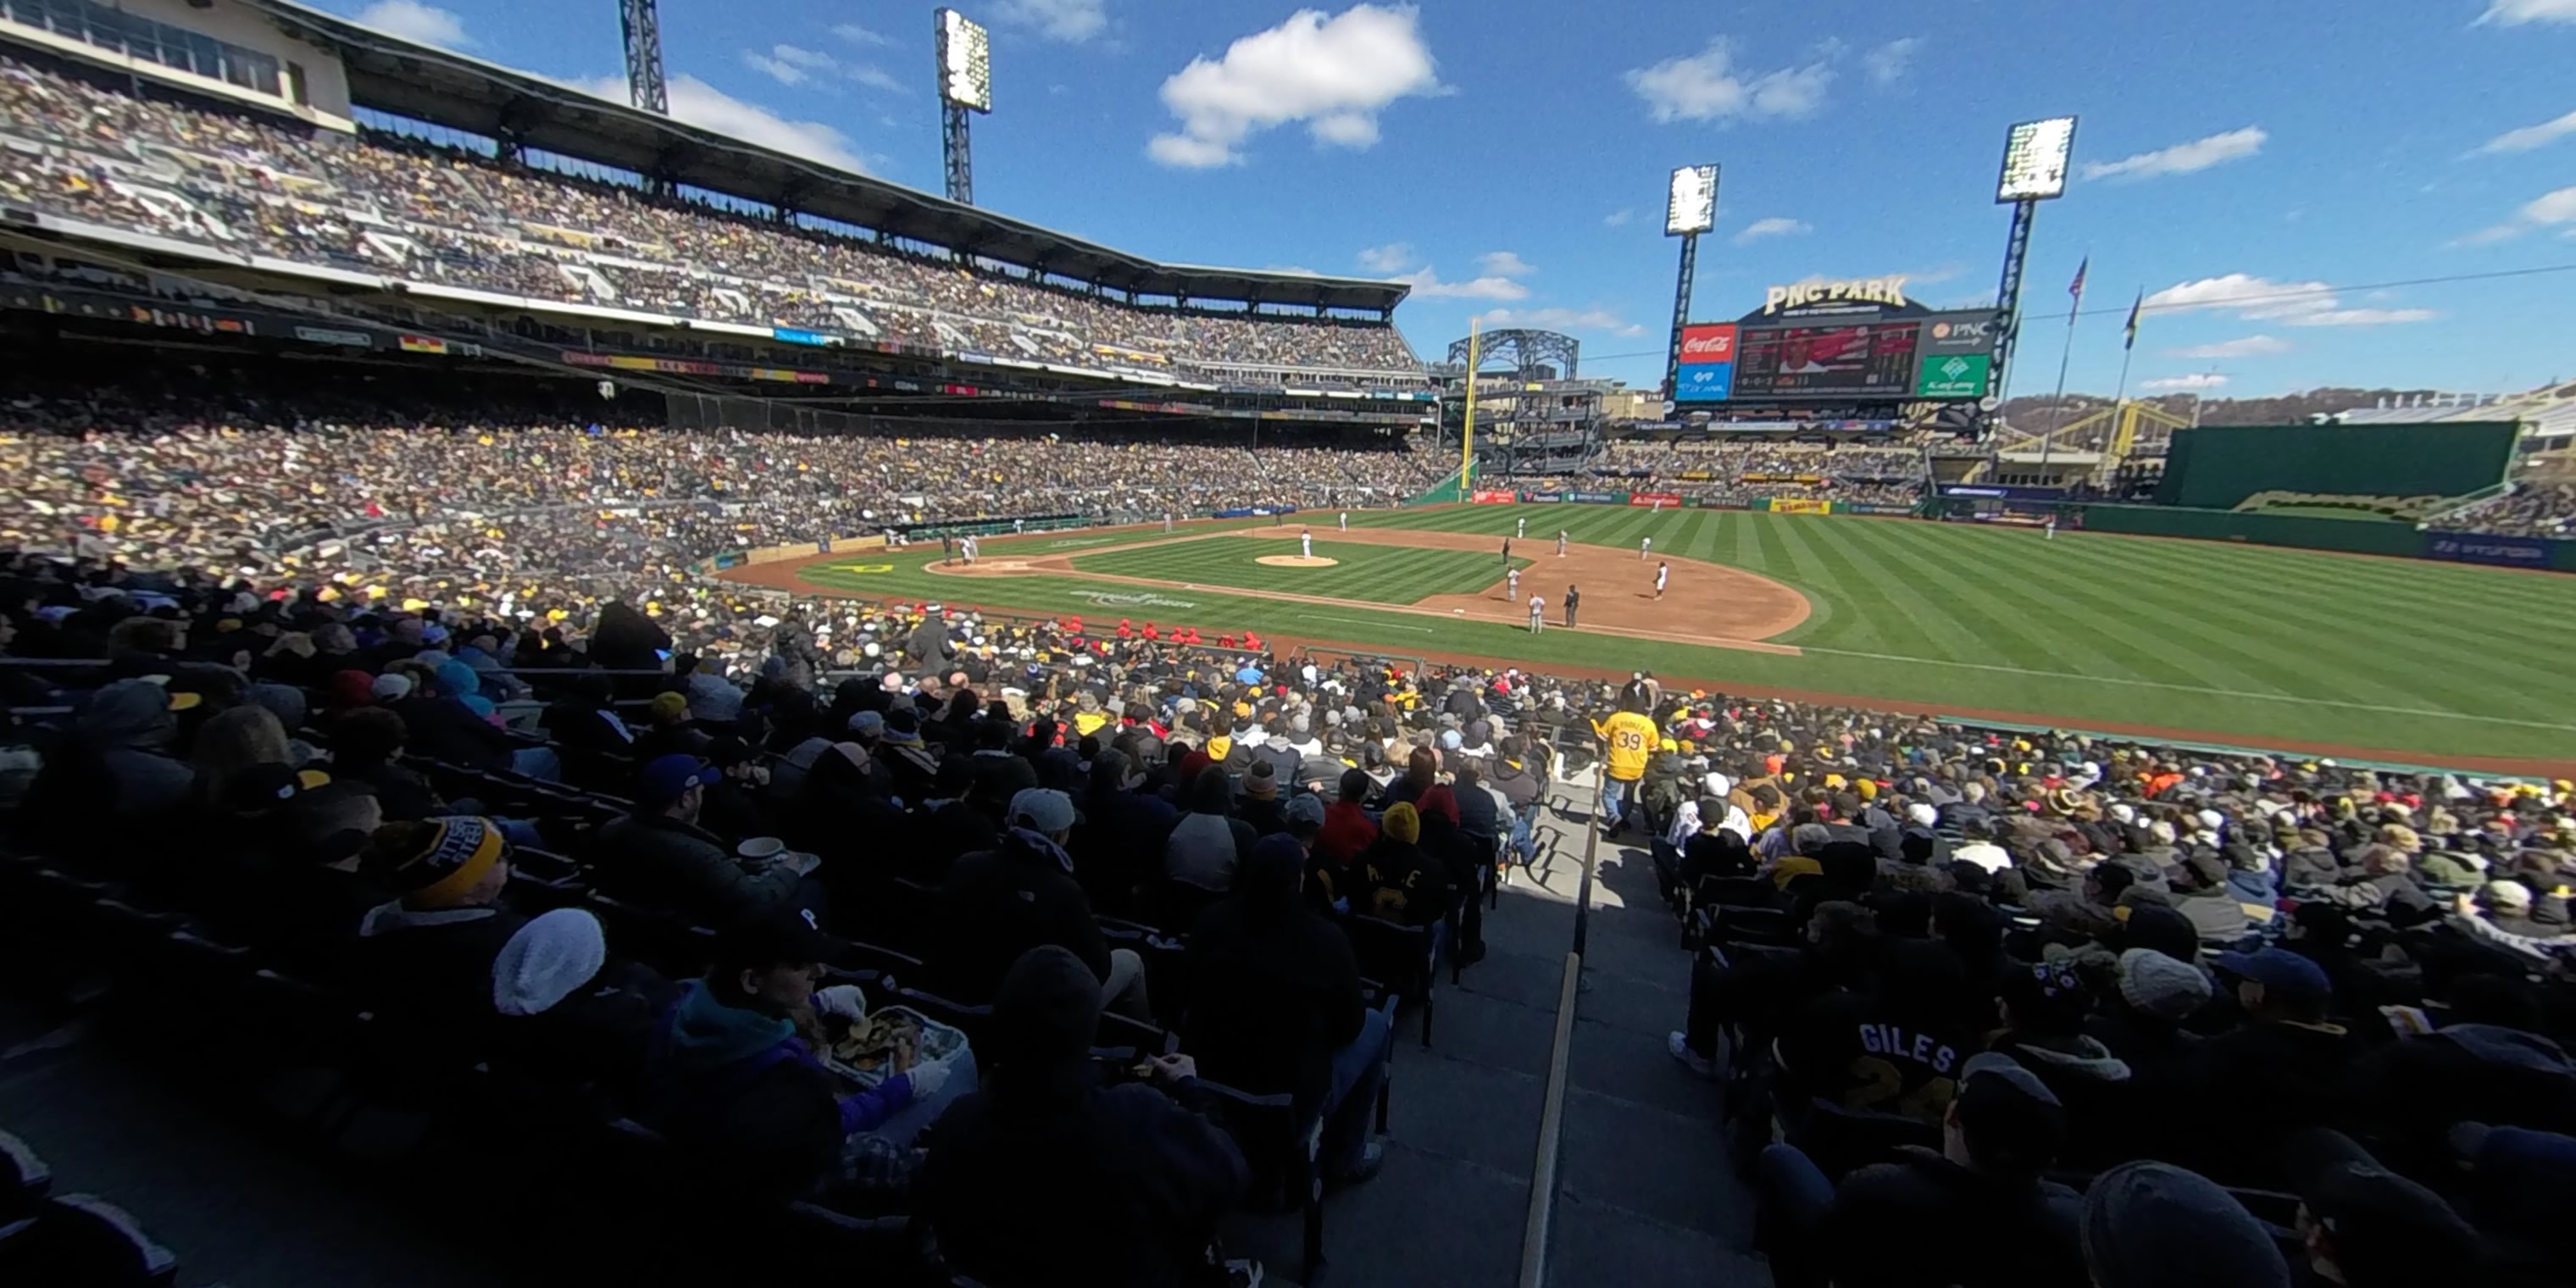 section 108 panoramic seat view  - pnc park